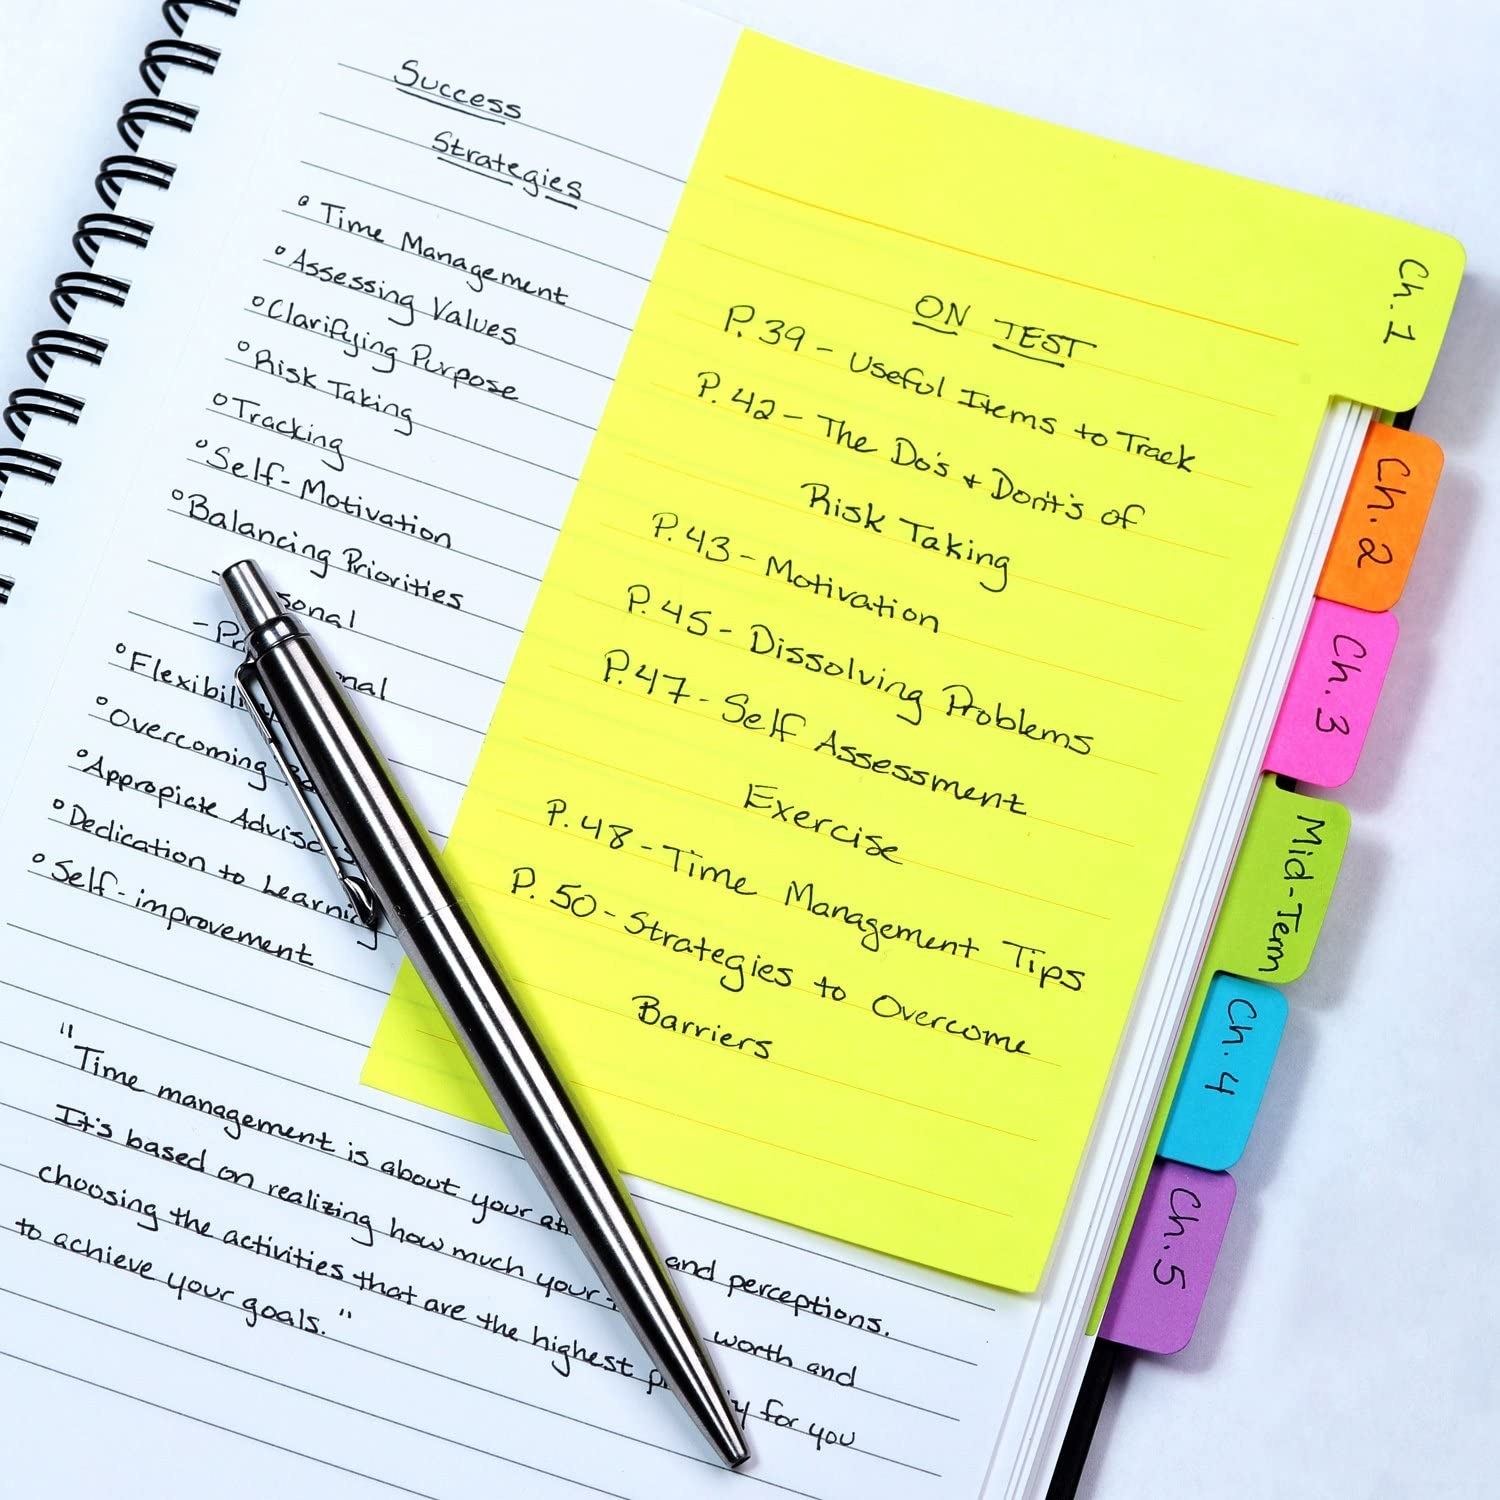 neon-colored sticky note dividers in a notebook